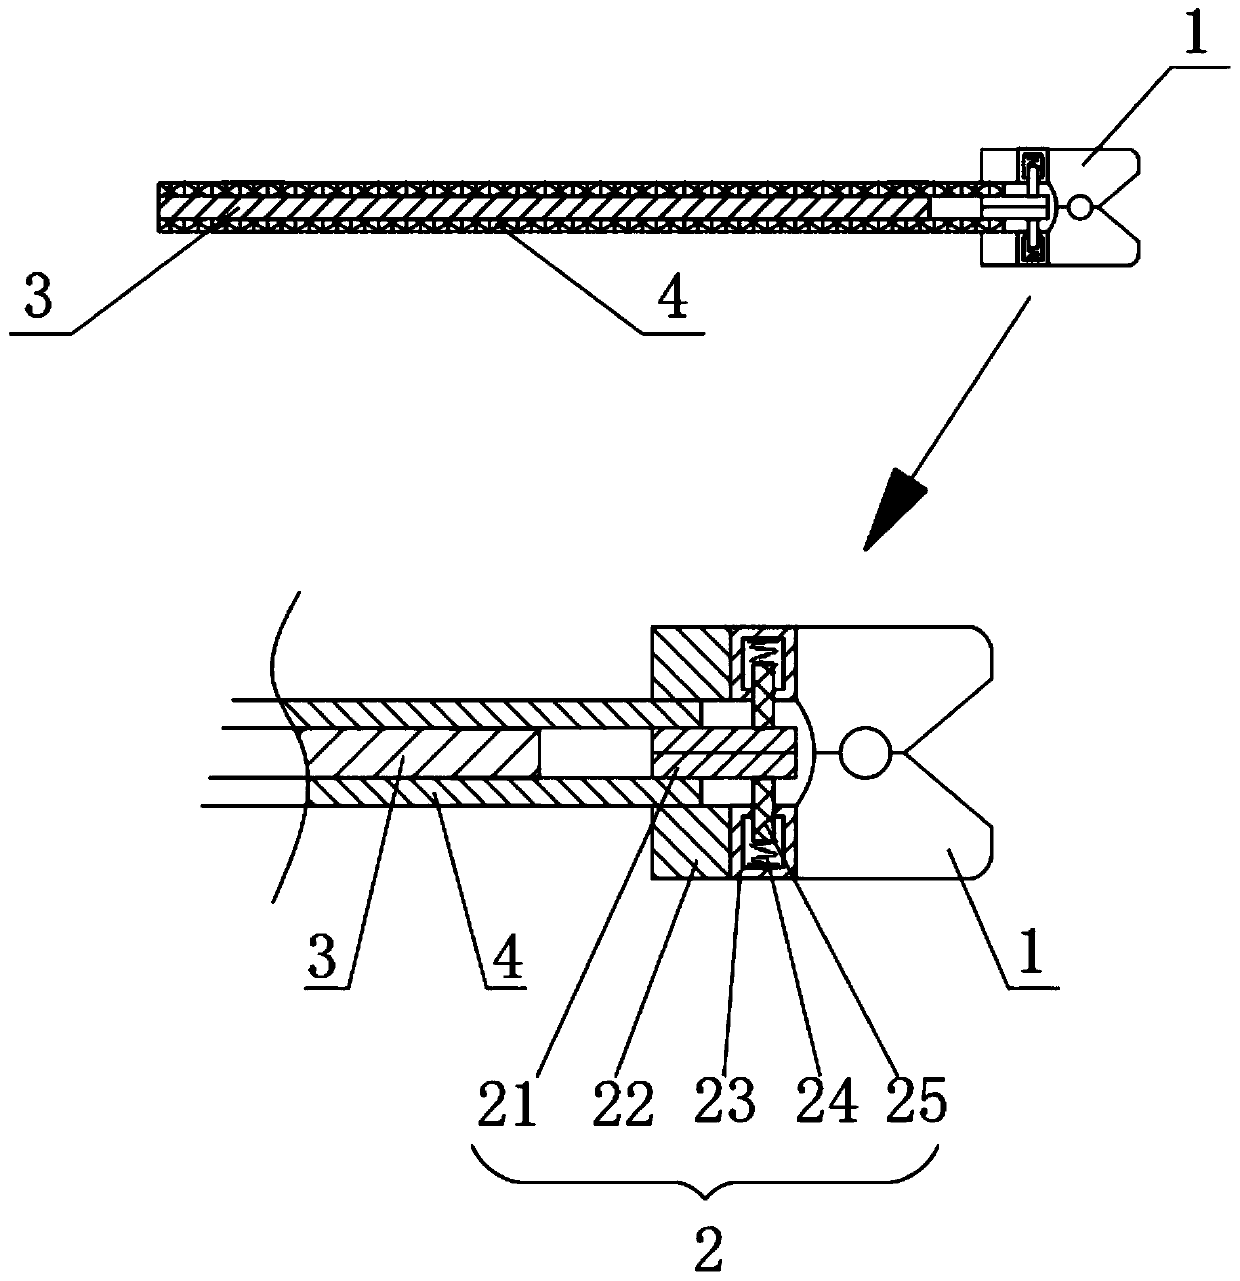 Blocking net clamp type insect trapping device